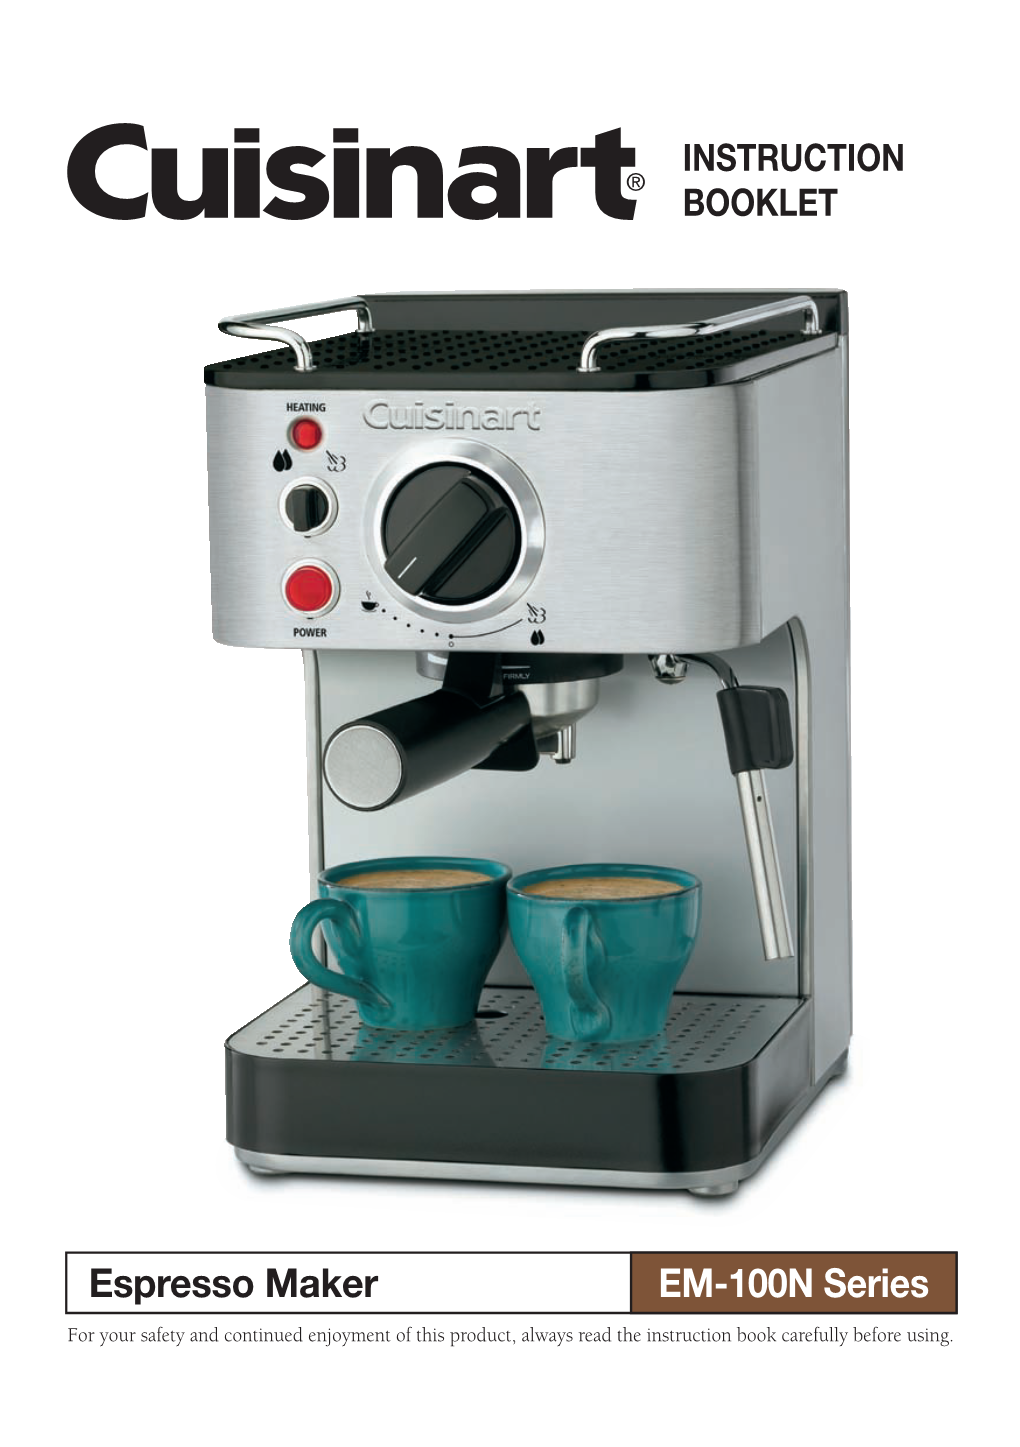 Espresso Maker EM-100N Series for Your Safety and Continued Enjoyment of This Product, Always Read the Instruction Book Carefully Before Using